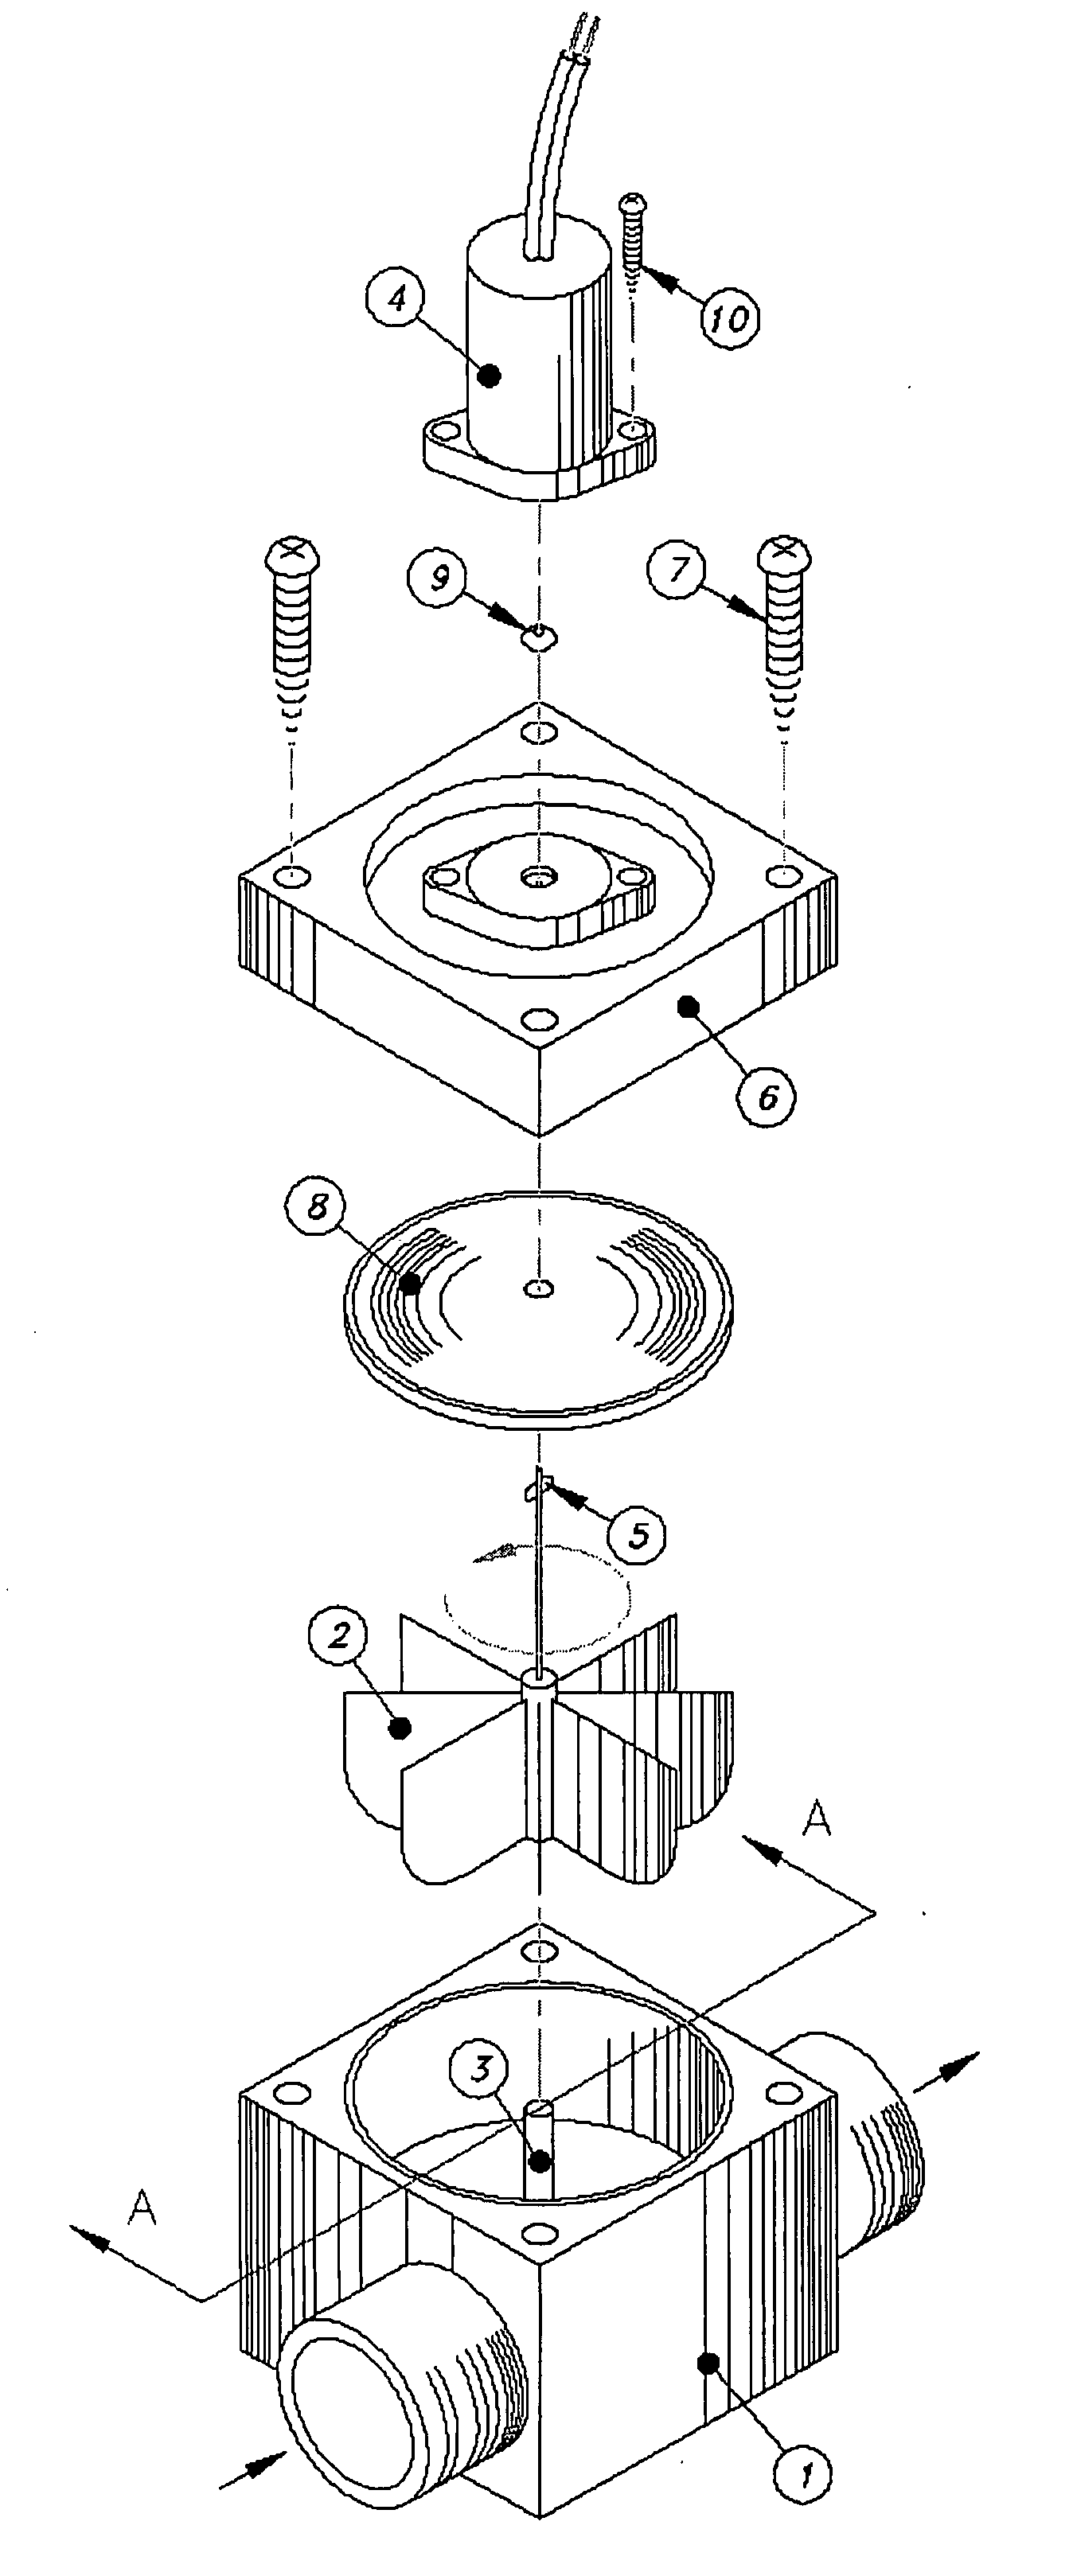 System and method for generating residential hydropower